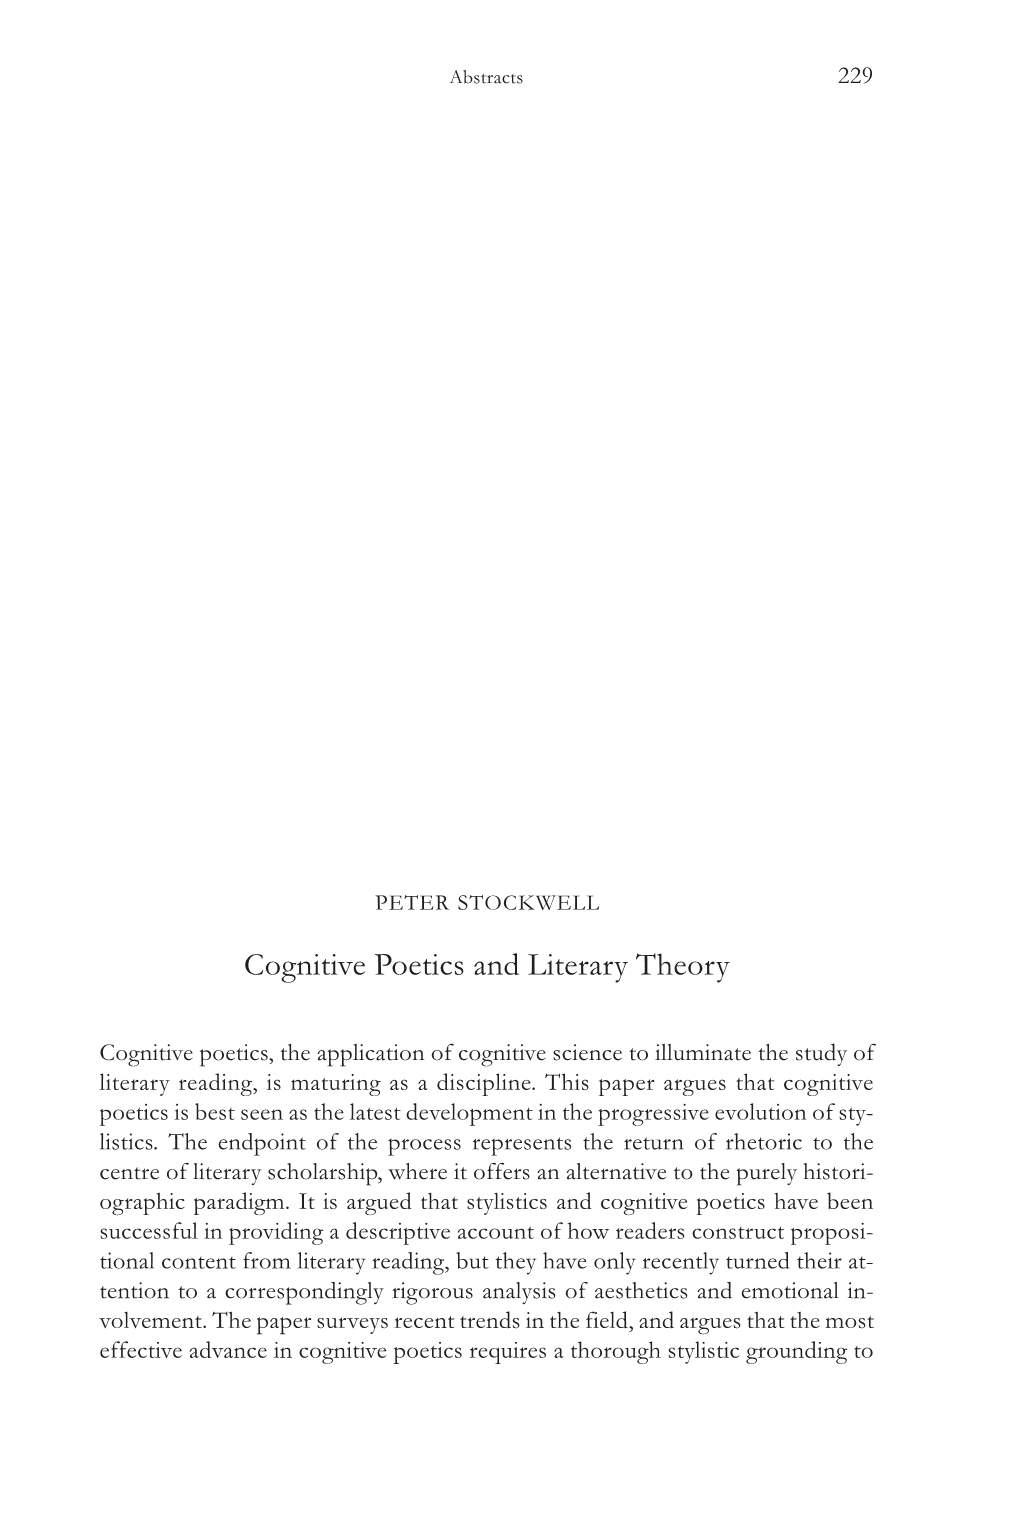 Cognitive Poetics and Literary Theory